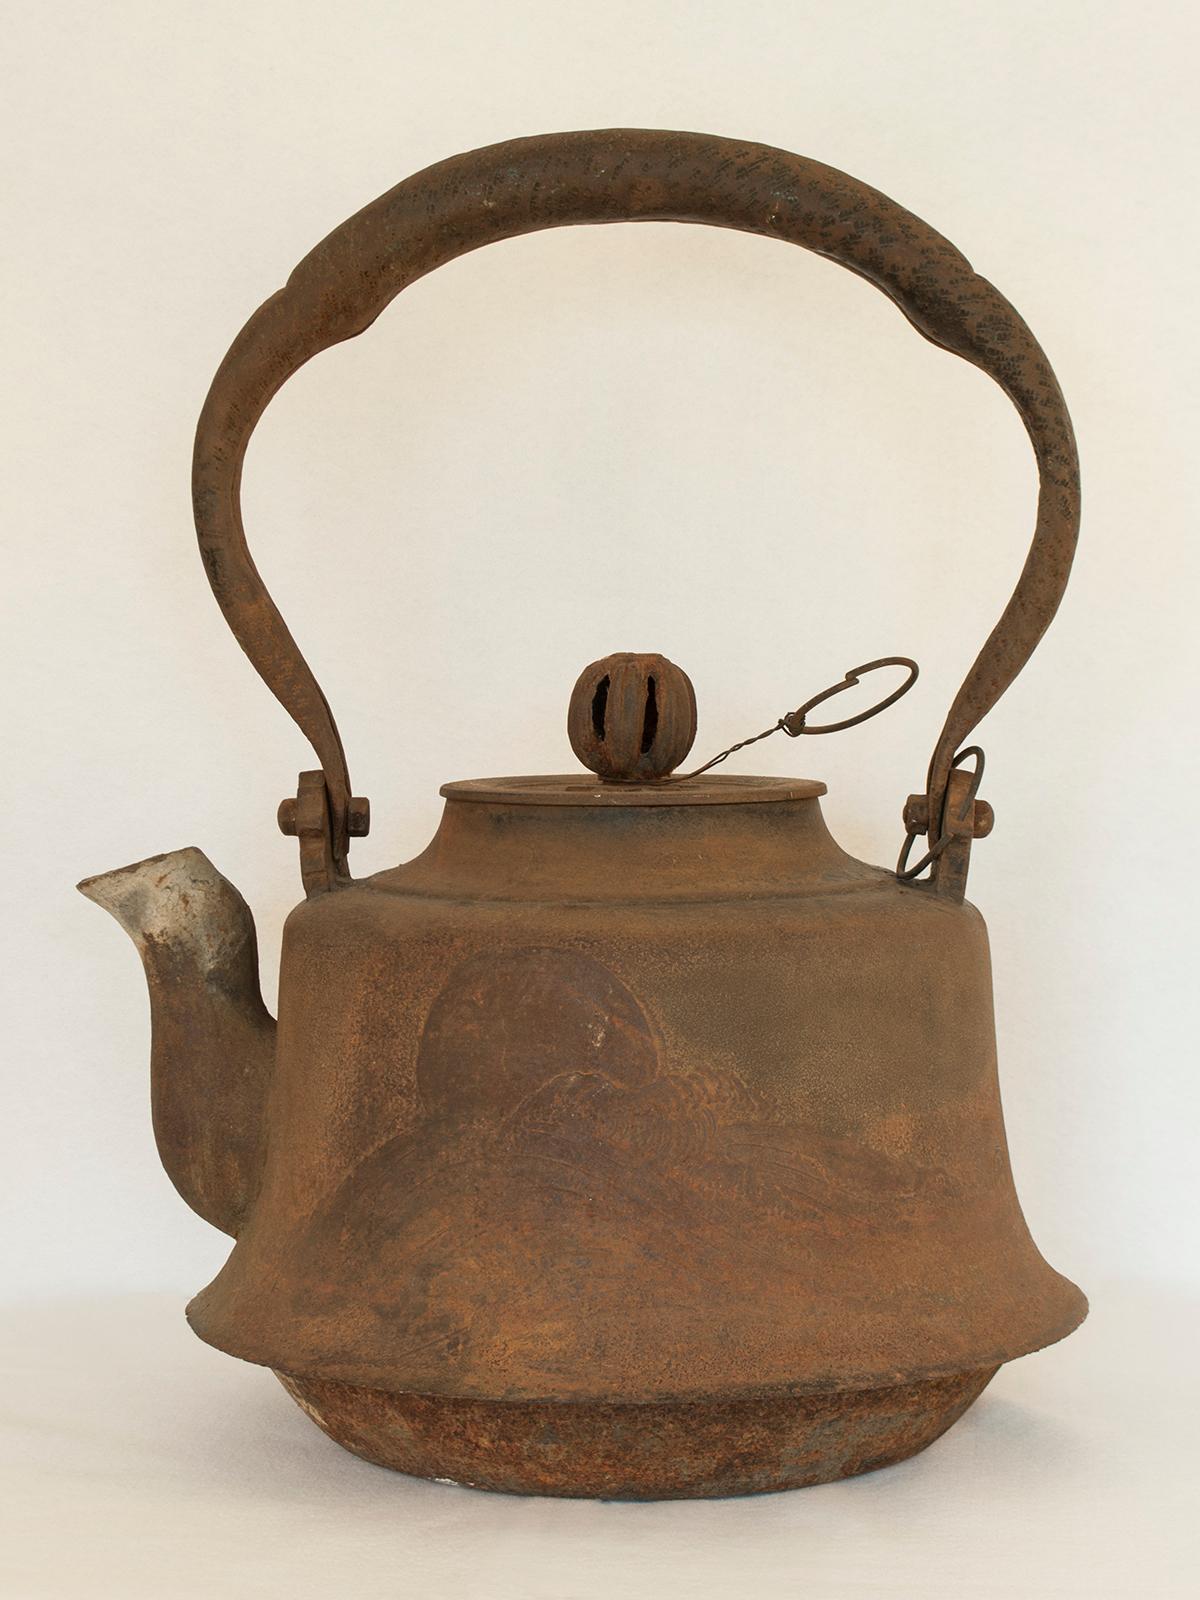 Large Meiji Period Iron Tea Pot, Japan

This very large iron tea pot would have been used outdoors to heat water over a large fire. There is a flying crane depicted on one side and a celestial body, perhaps the moon, setting in a wave-filled sea on